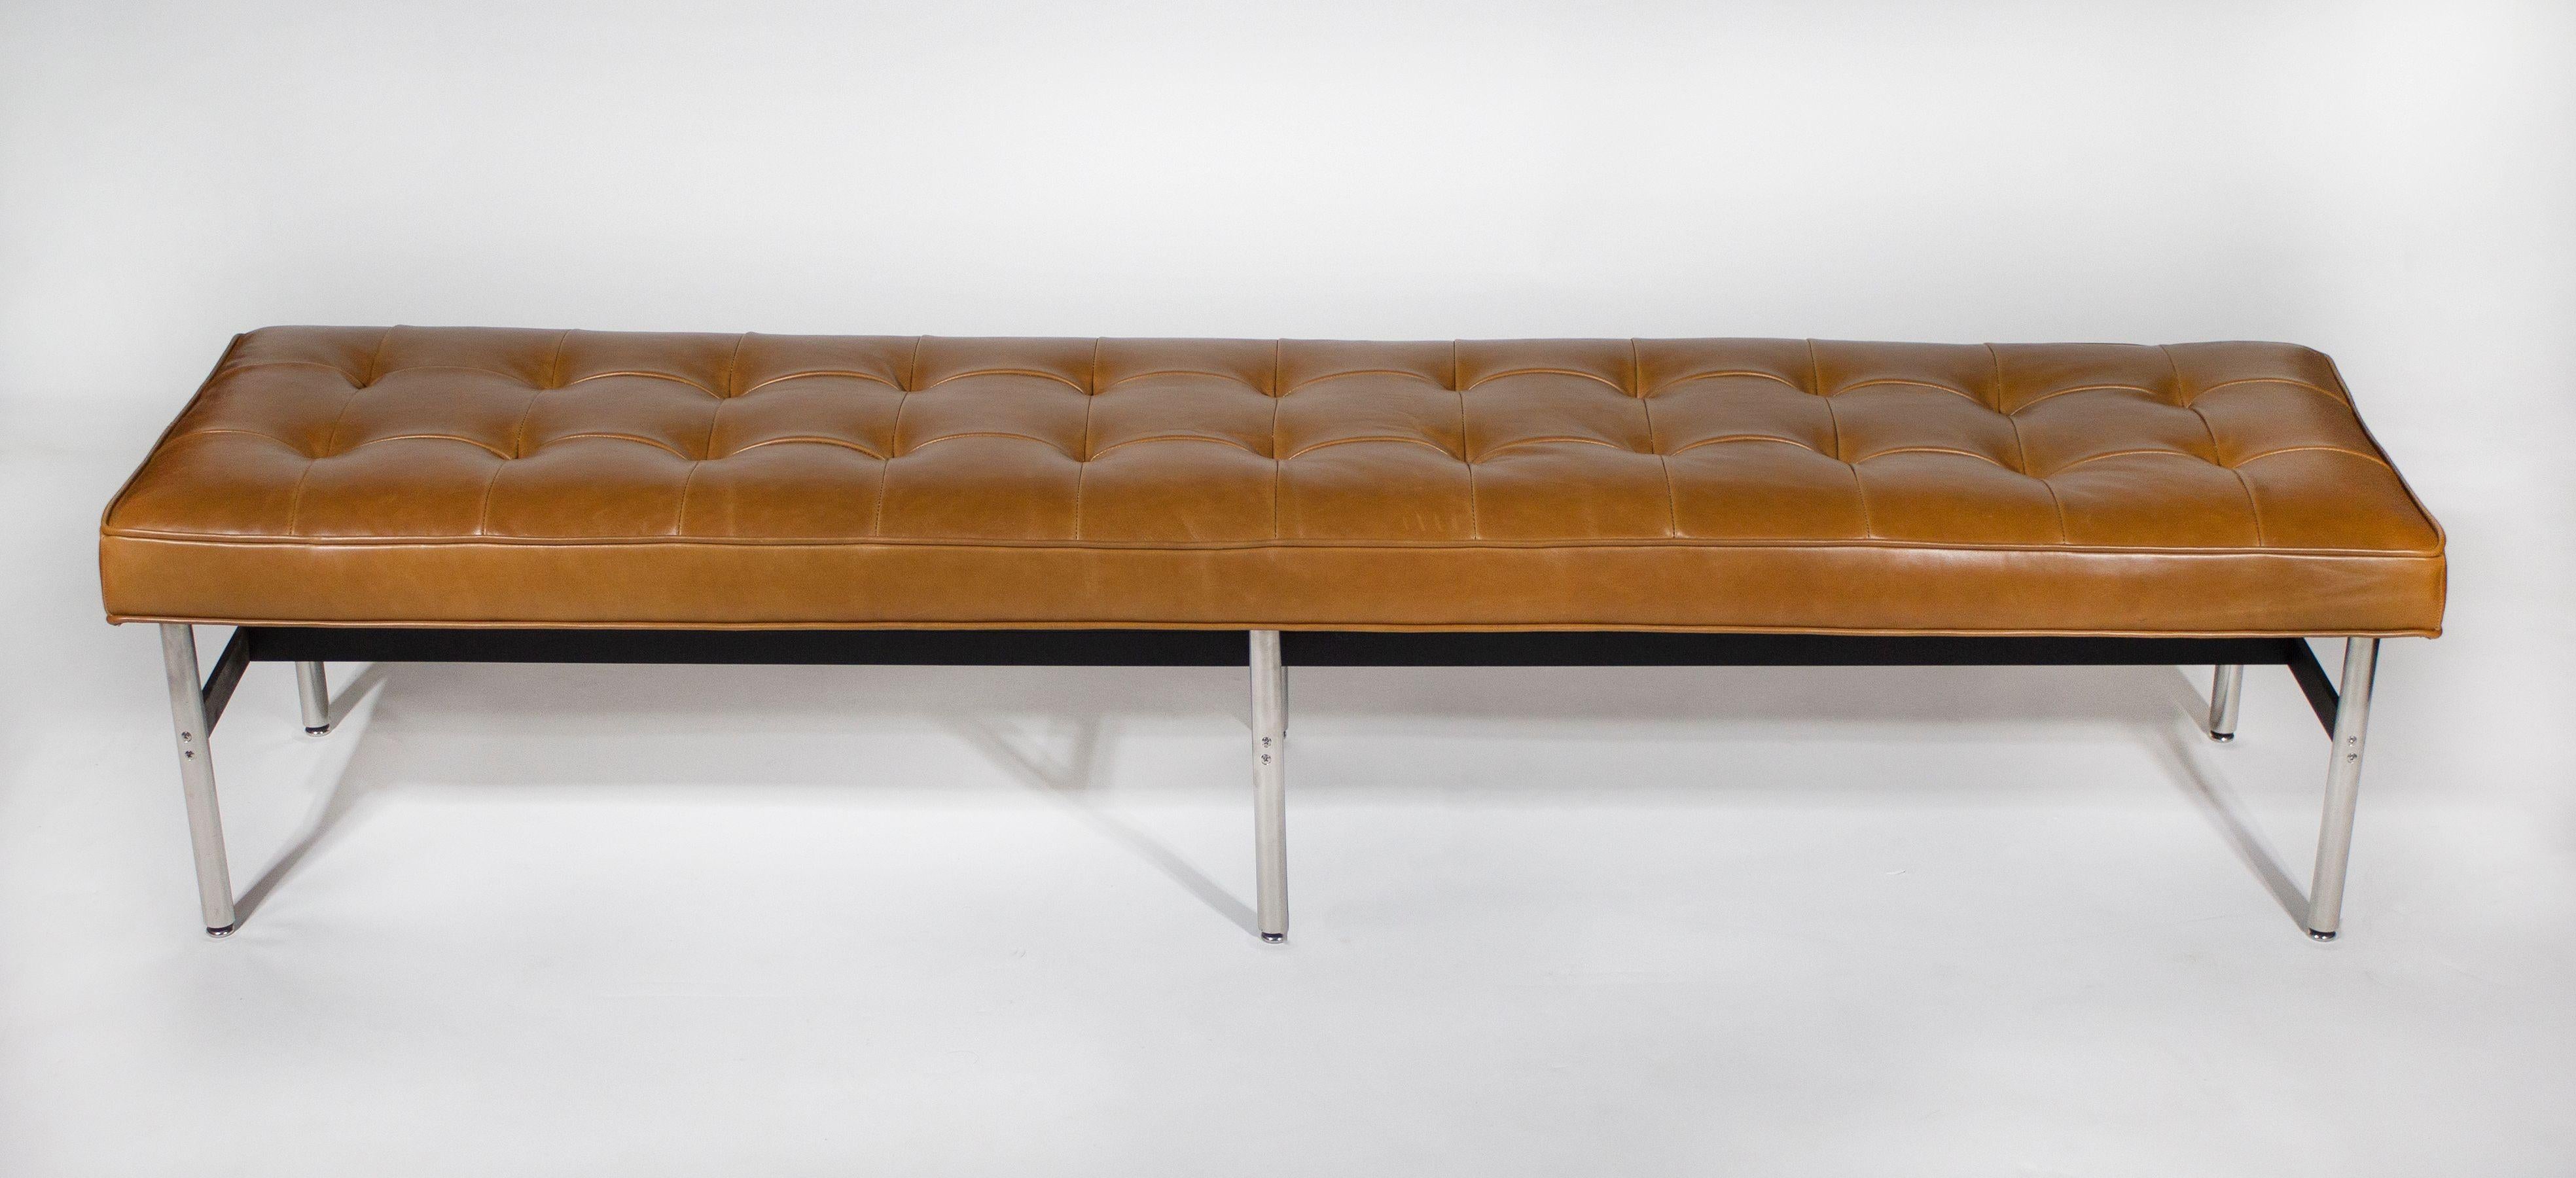 A beautiful Laverne International New York City Long bench full restored in a smooth camel-colored waxed leather. A timeless modernist piece designed by William Katavolos, Douglas Kelley & Ross Littell in the 1950s. Some of the designs from this